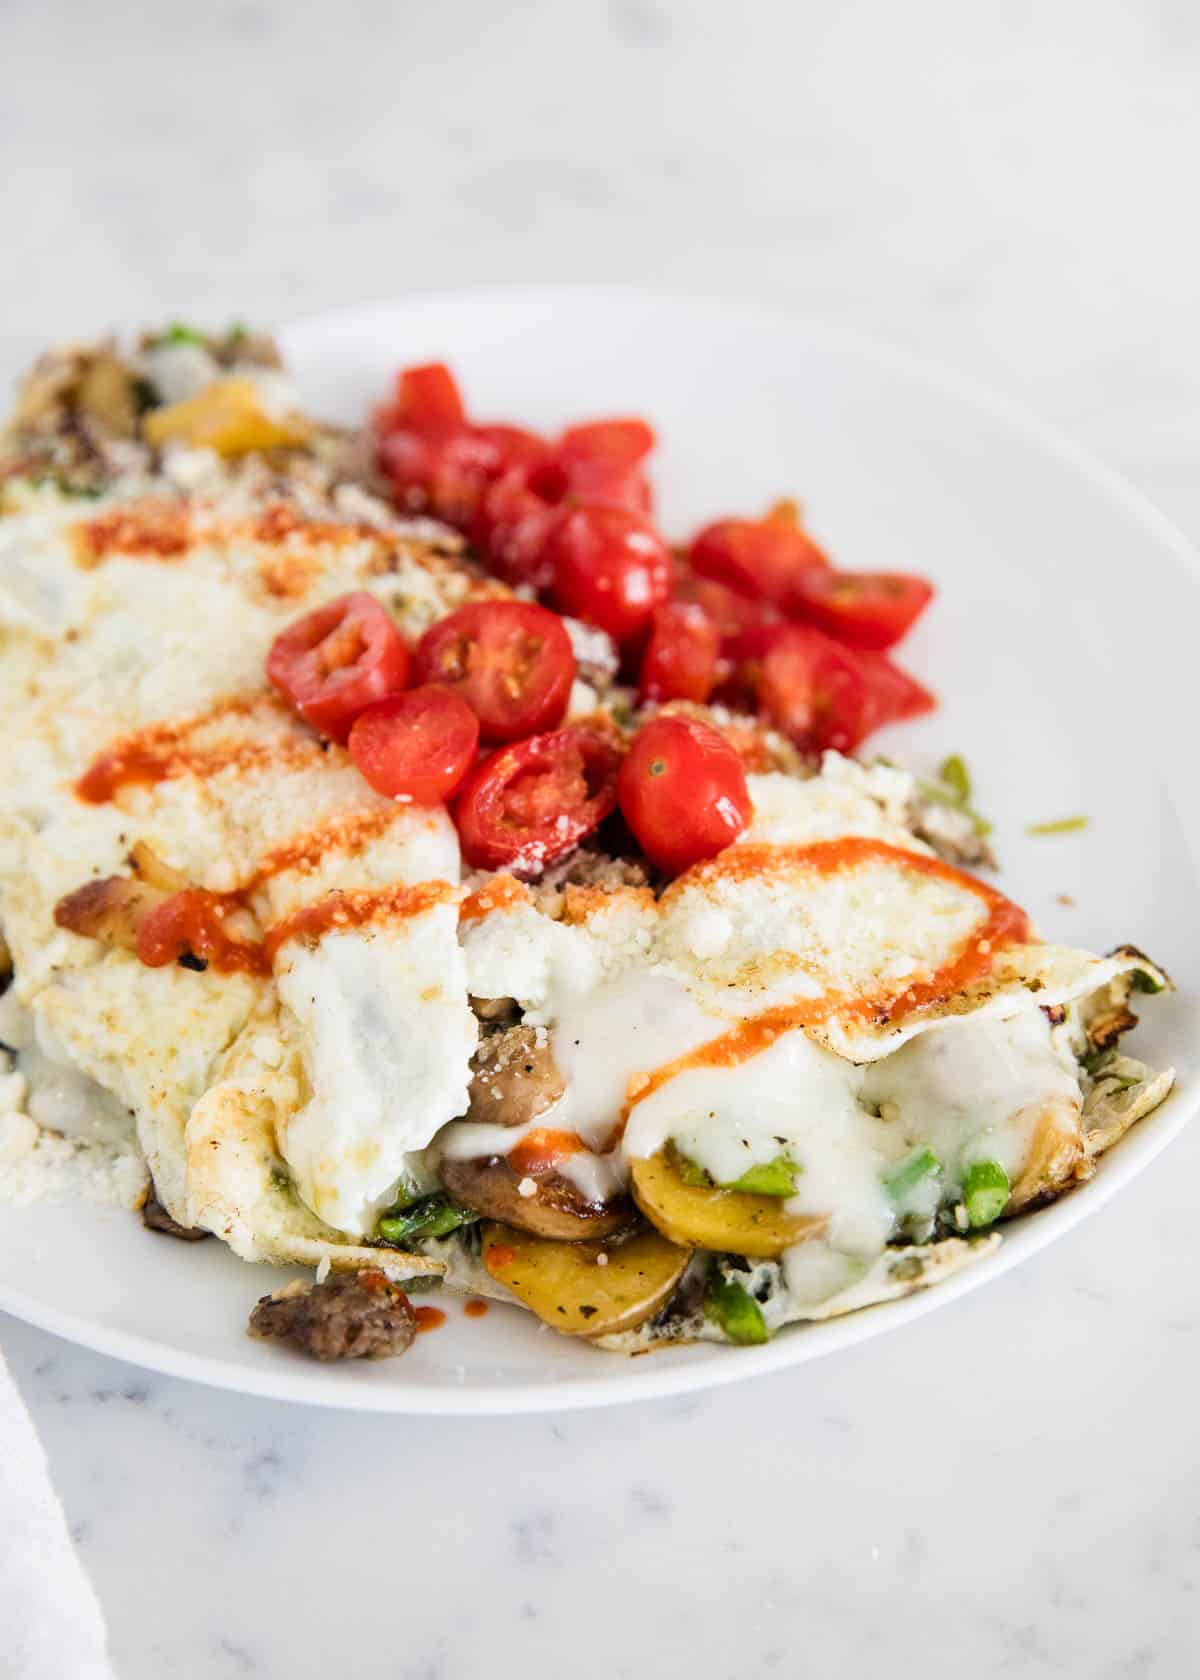 Egg white omelette with tomatoes on top.